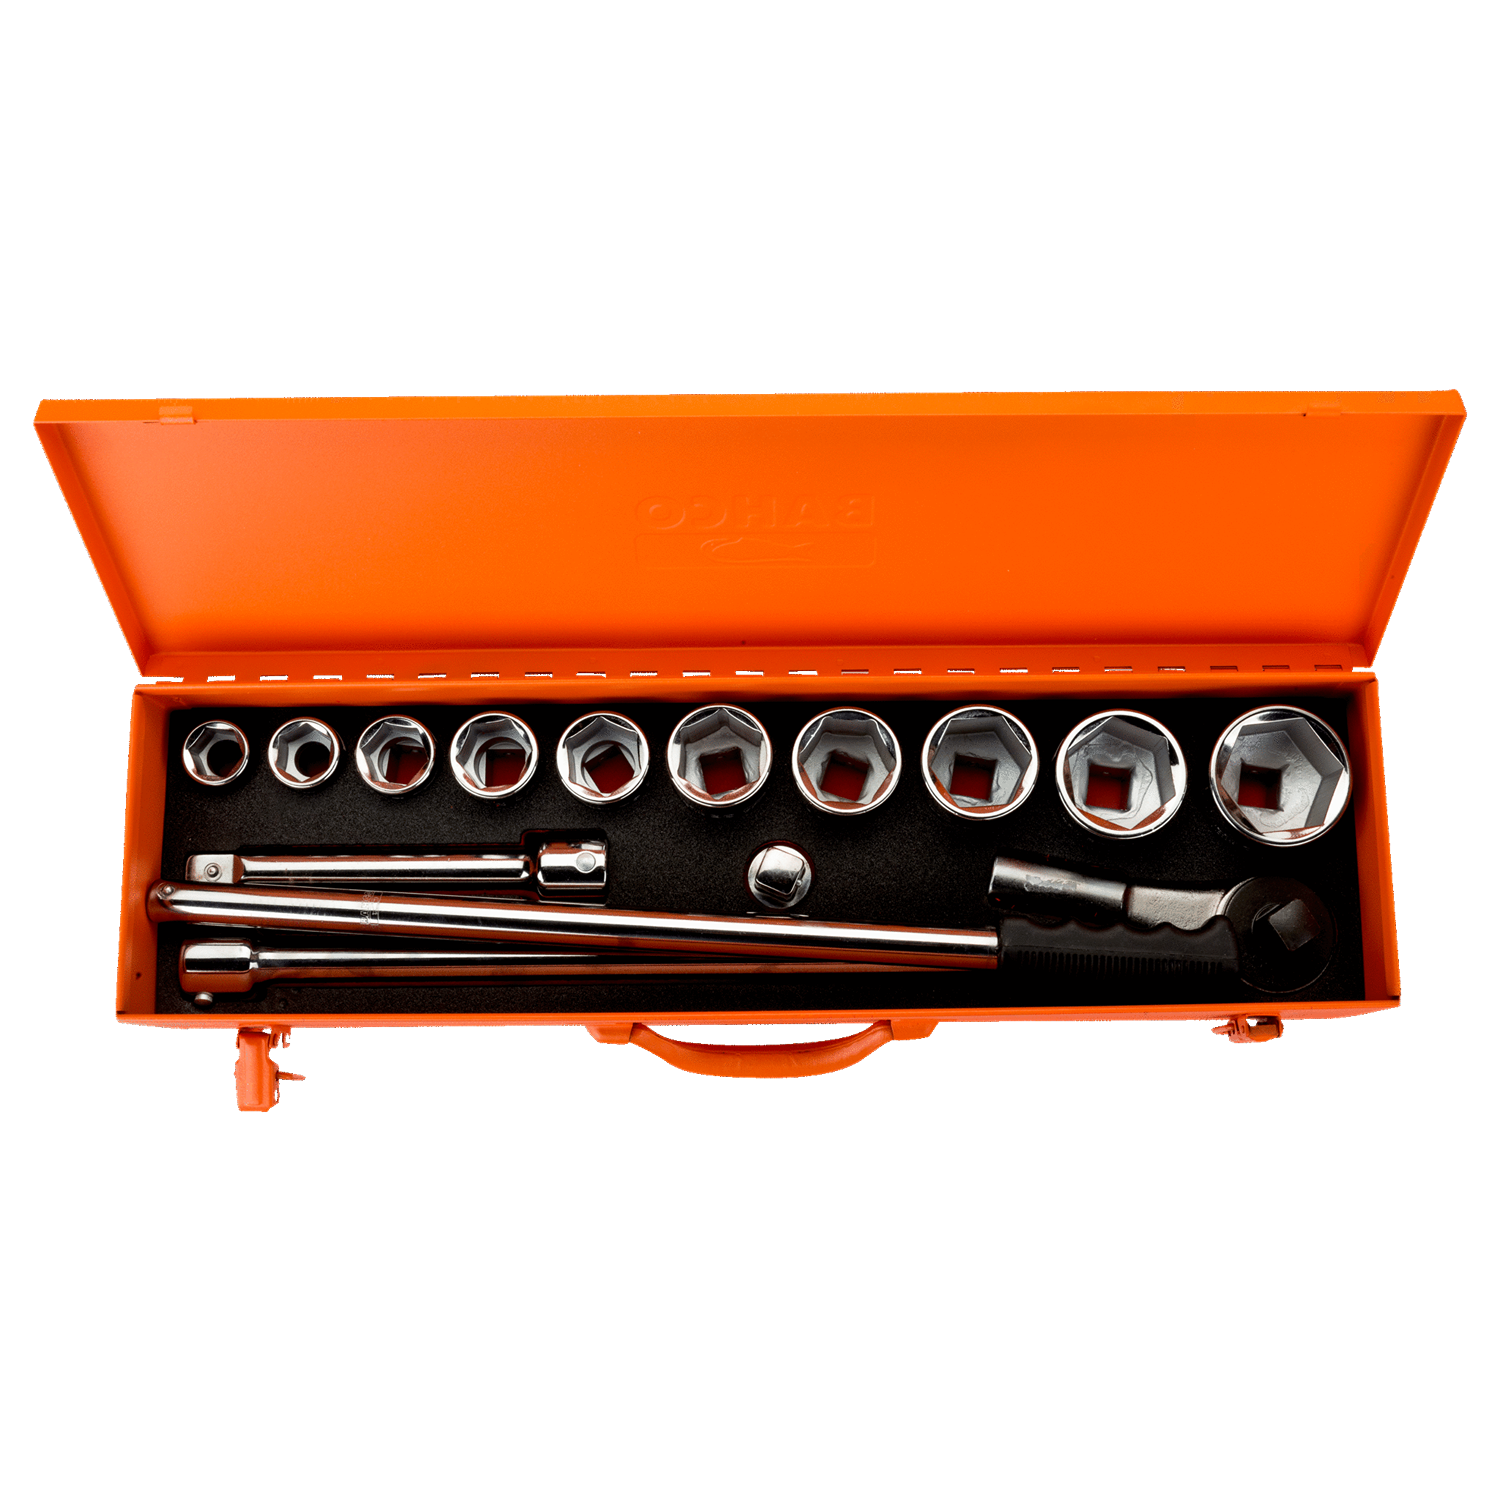 BAHCO 8845NM 3/4 Square Drive Socket Set Metric Hex Profile - Premium Socket Set from BAHCO - Shop now at Yew Aik.